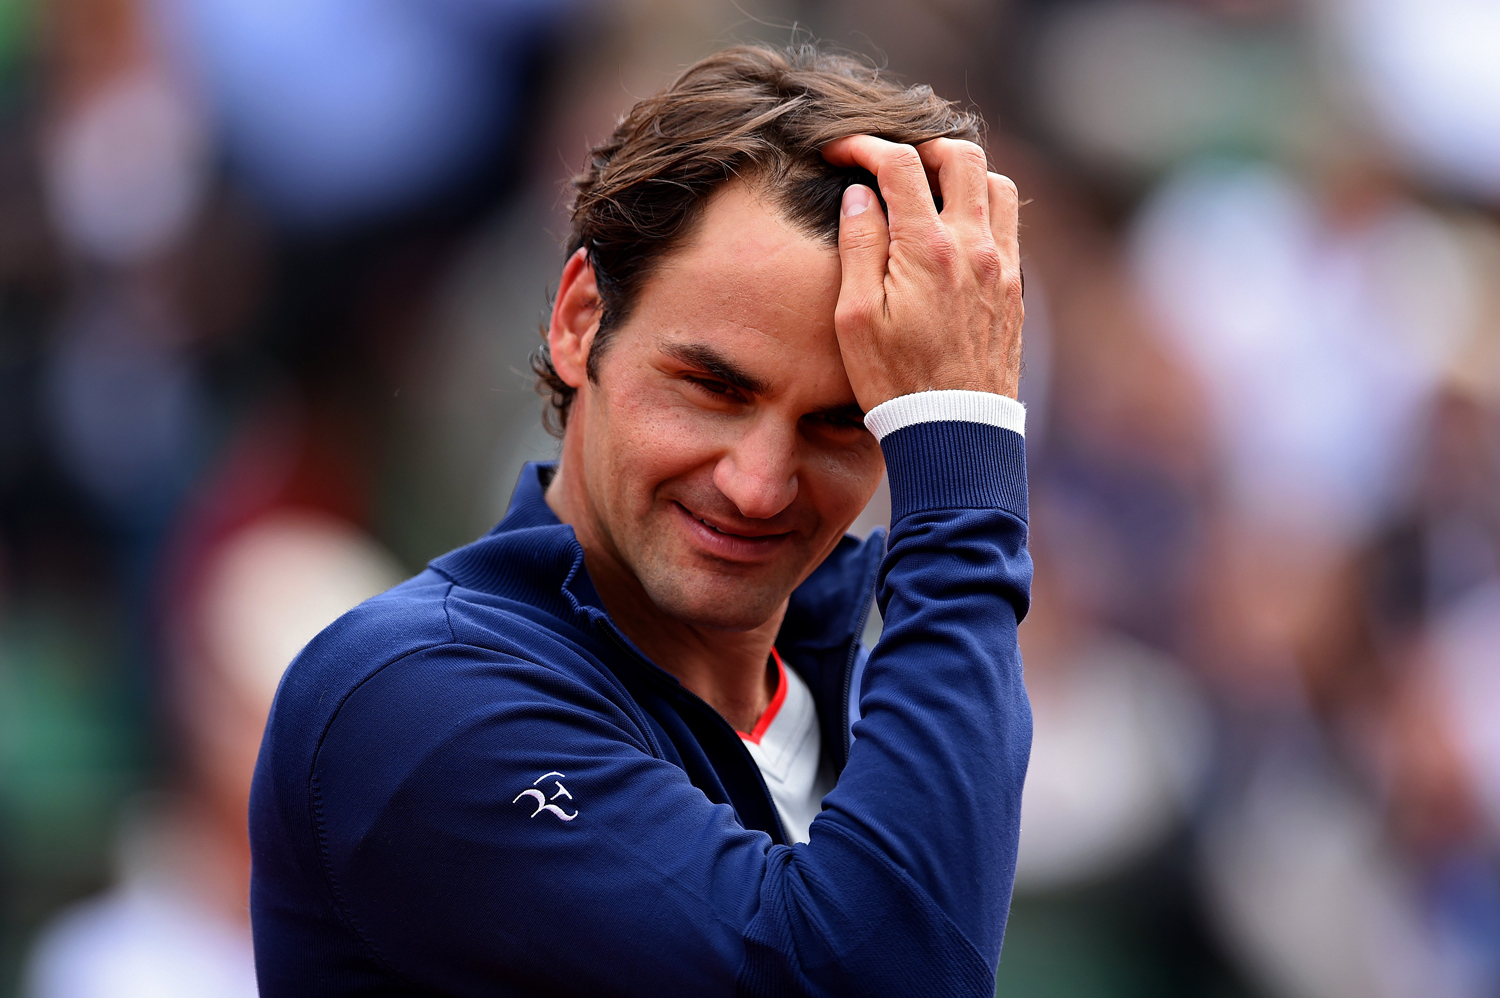 Roger Federer smiles following victory in his men's singles match against Lukas Lacko of Slovakia on day one of the French Open at Roland Garros on May 25, 2014 in Paris. (Matthias Hangst—Getty Images)